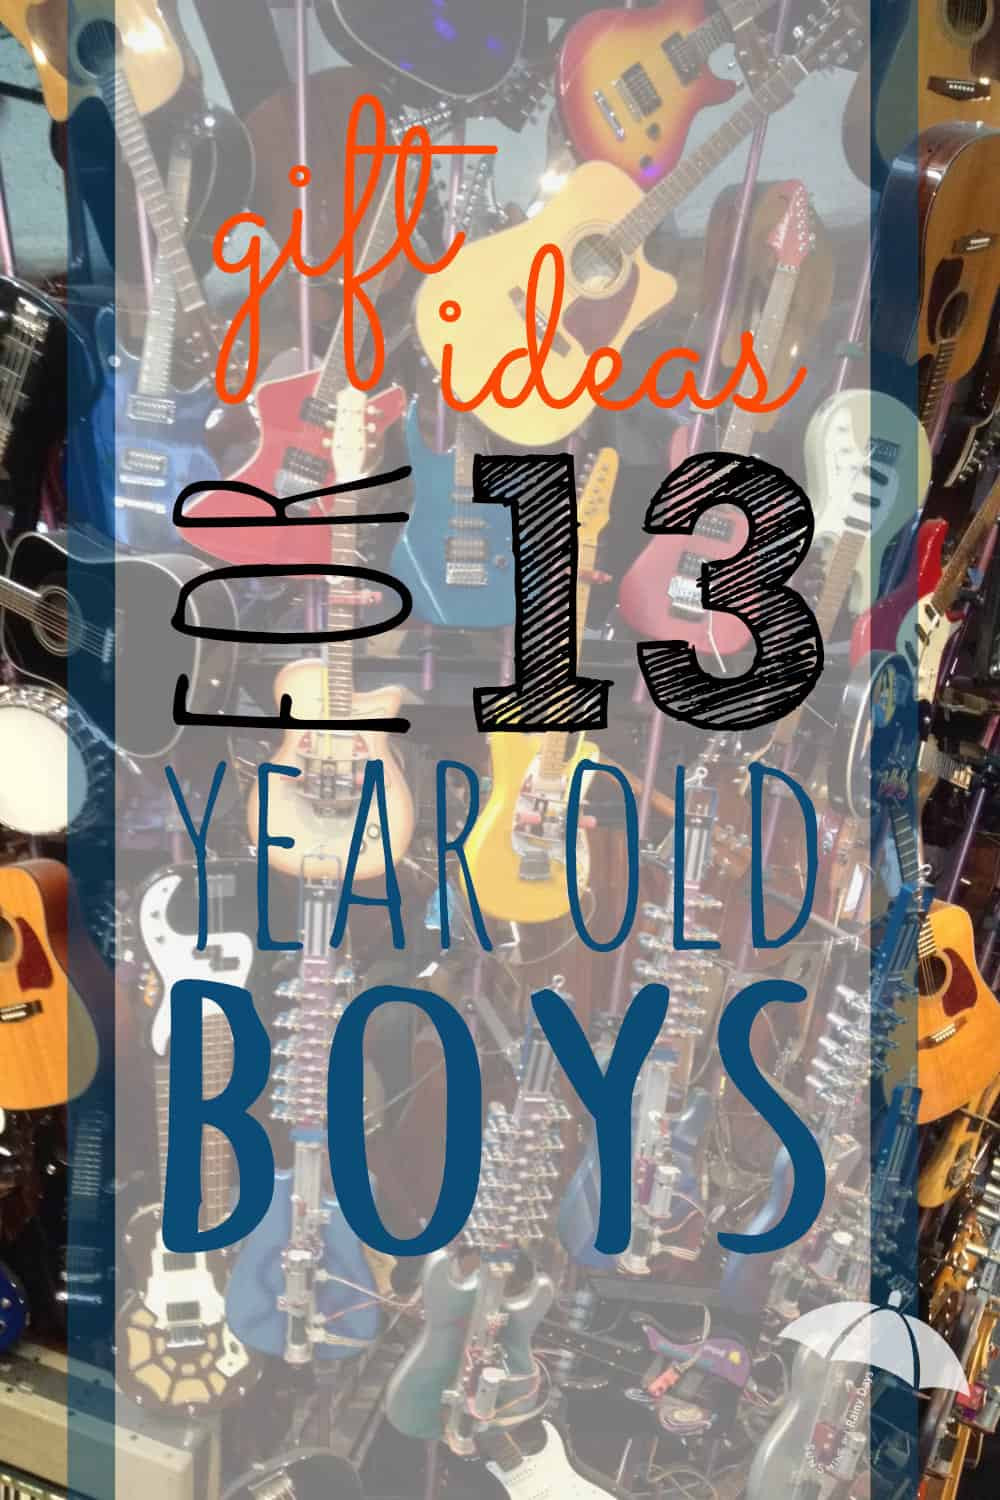 Gift Ideas For 13 Year Old Boys
 Gift Ideas for 13 Year Old Boys Sunshine And Rainy Days